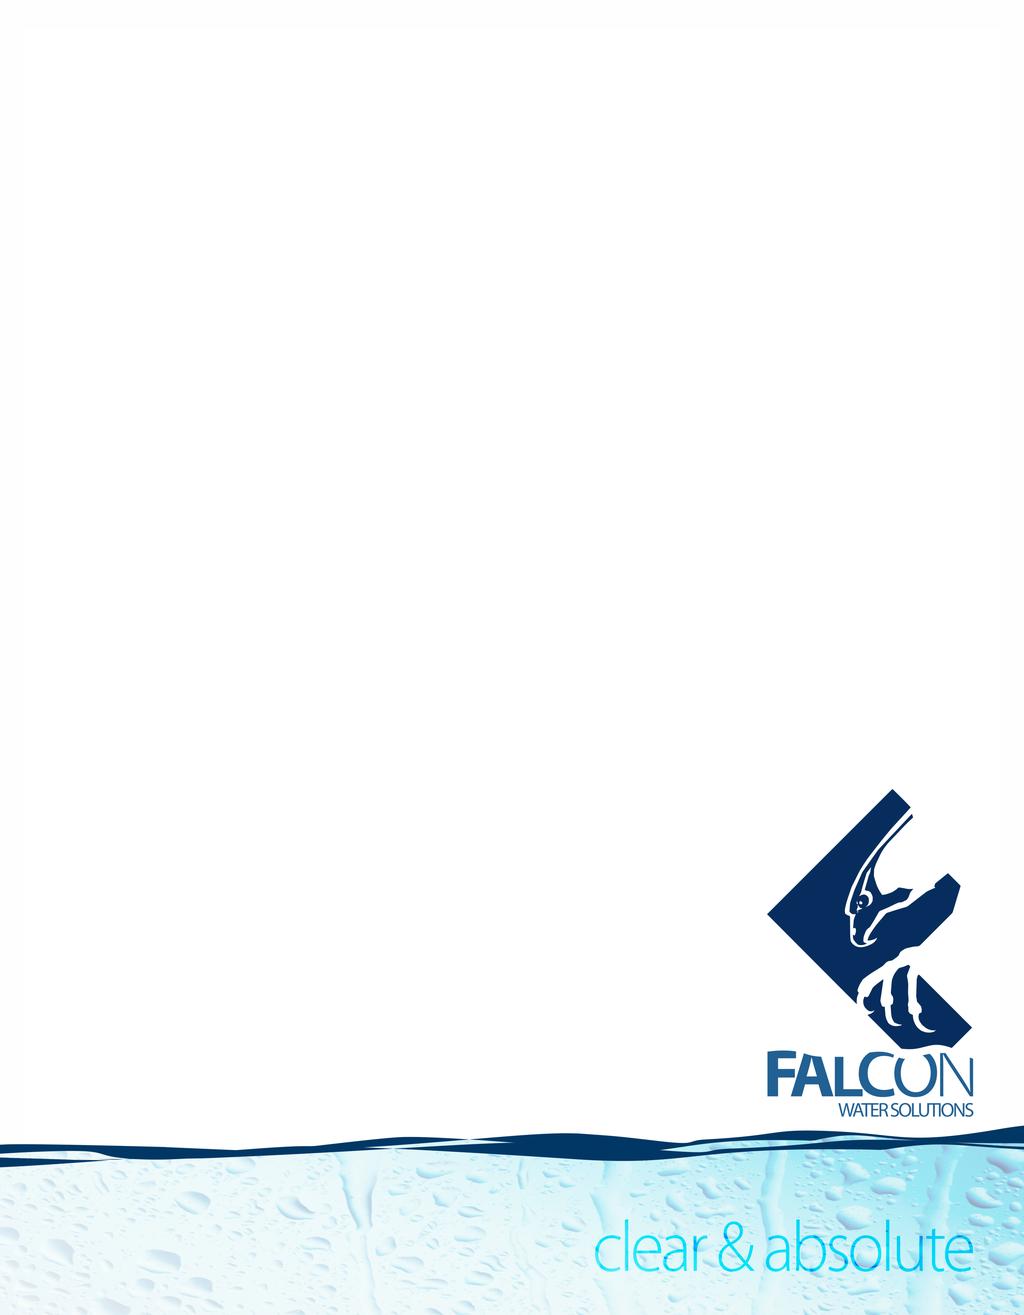 FALCON tech data info@falconwatersolution.com 780 705 2526 10015-56 Ave NW Other Things I Should Know?